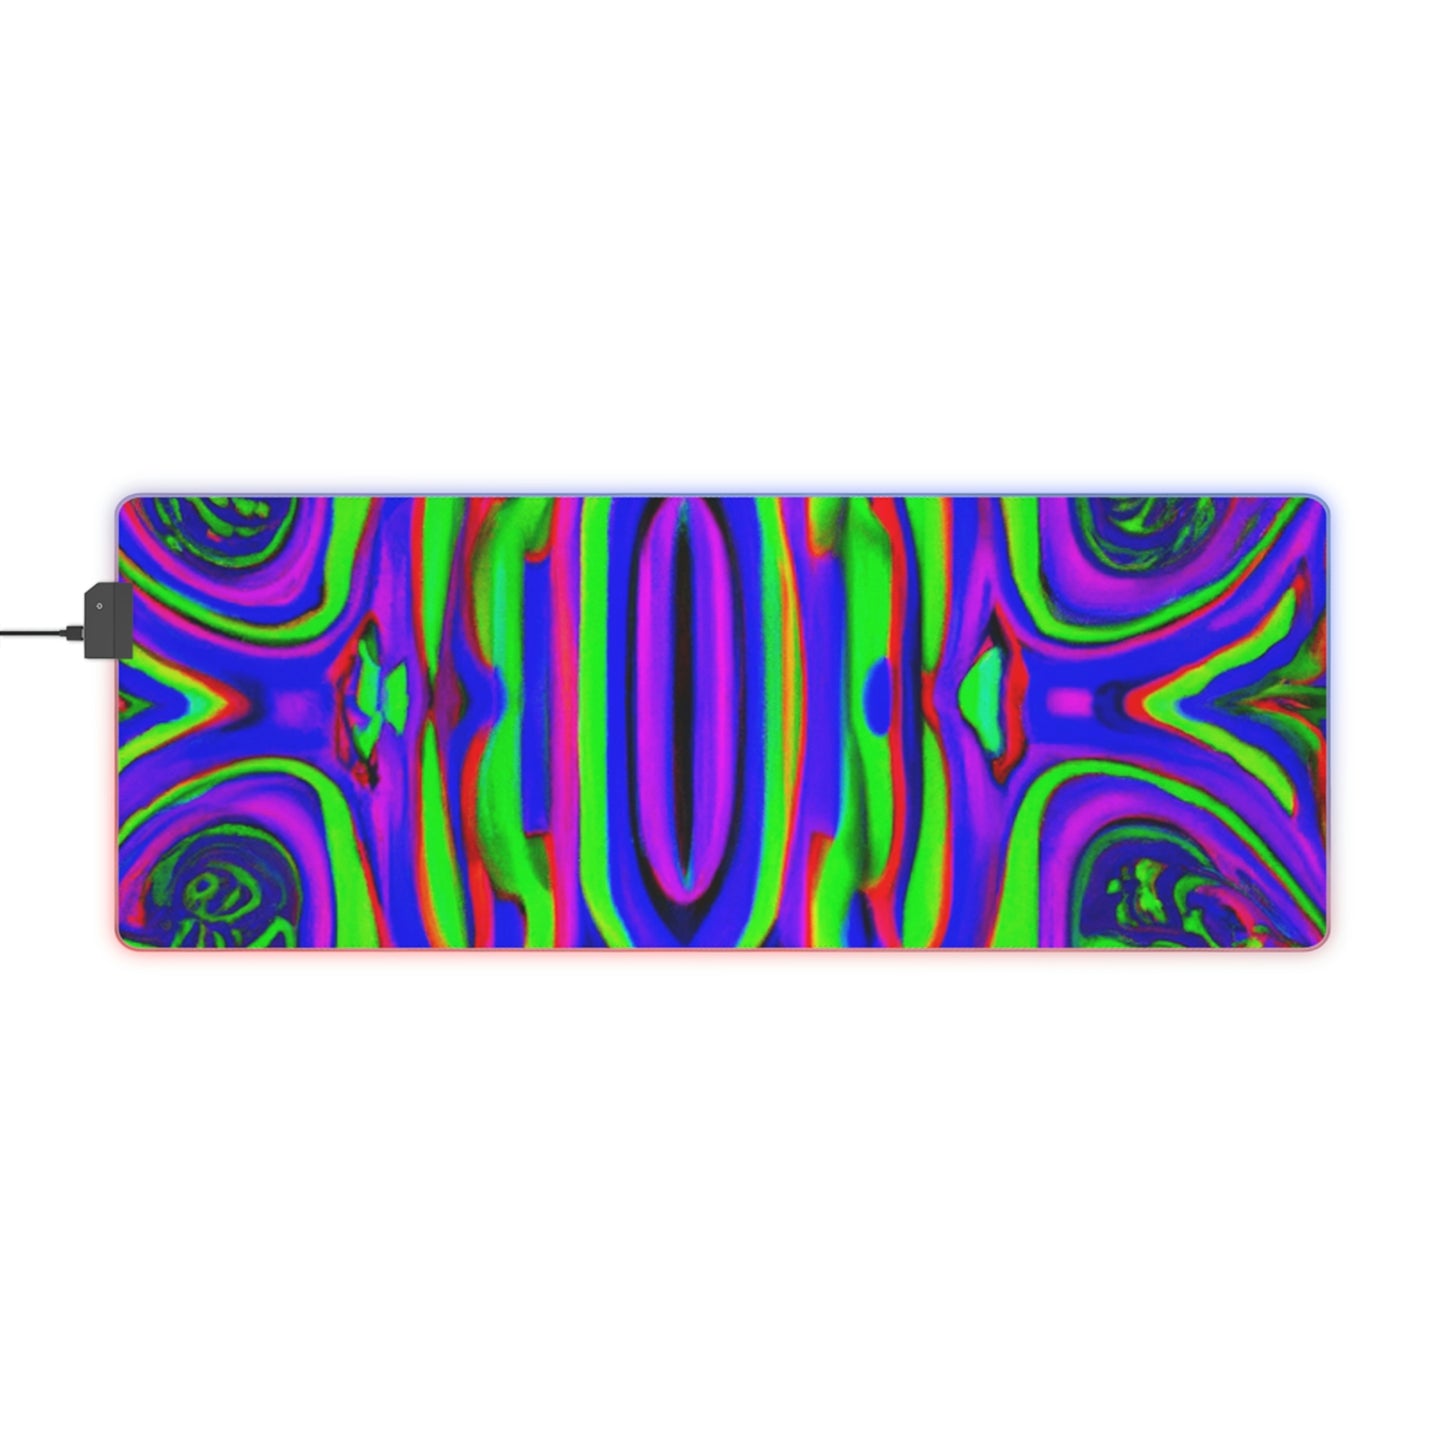 Fritz the Freewheeler - Psychedelic Trippy LED Light Up Gaming Mouse Pad